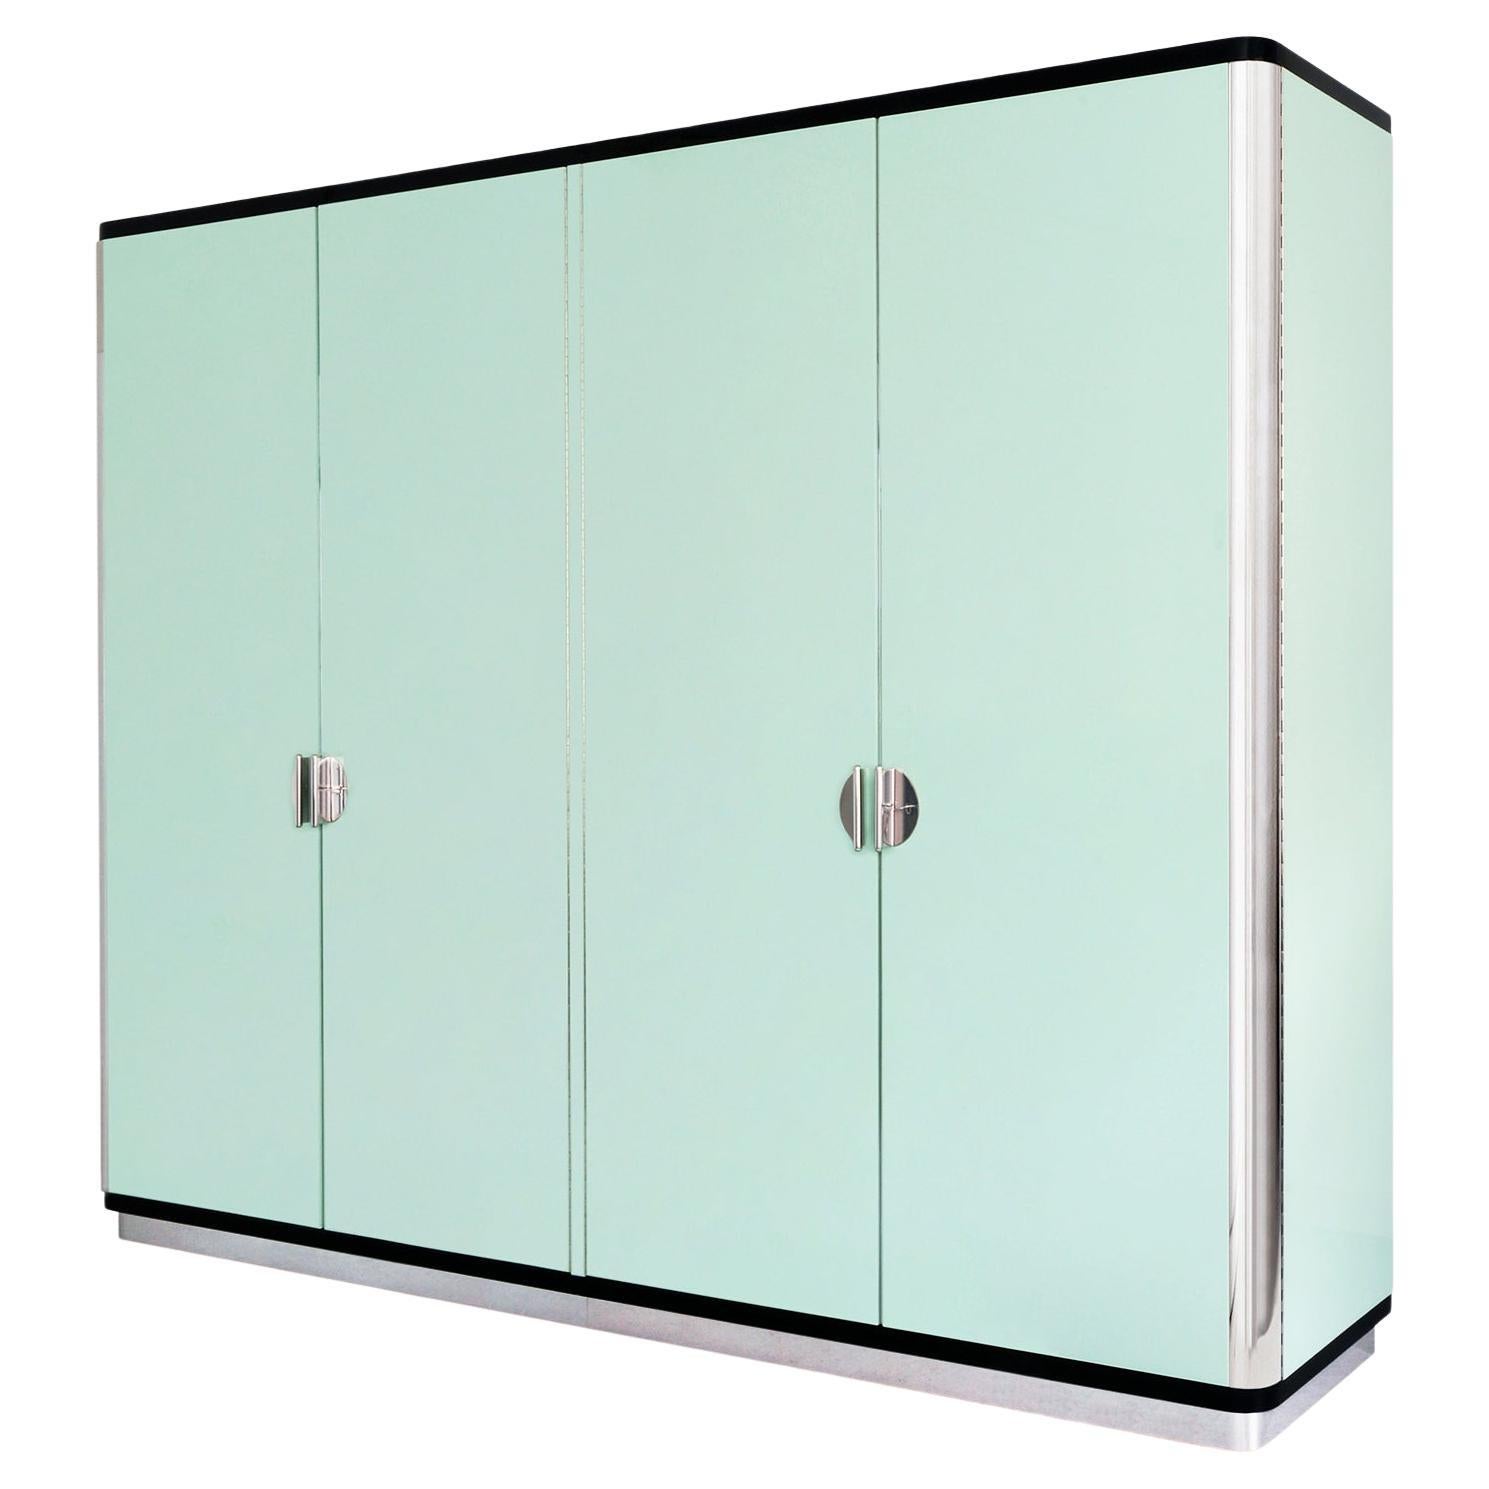 Bespoke Modernist Four-Door Wardrobe, High Gloss Lacquer, Chrome-Plated Metal For Sale